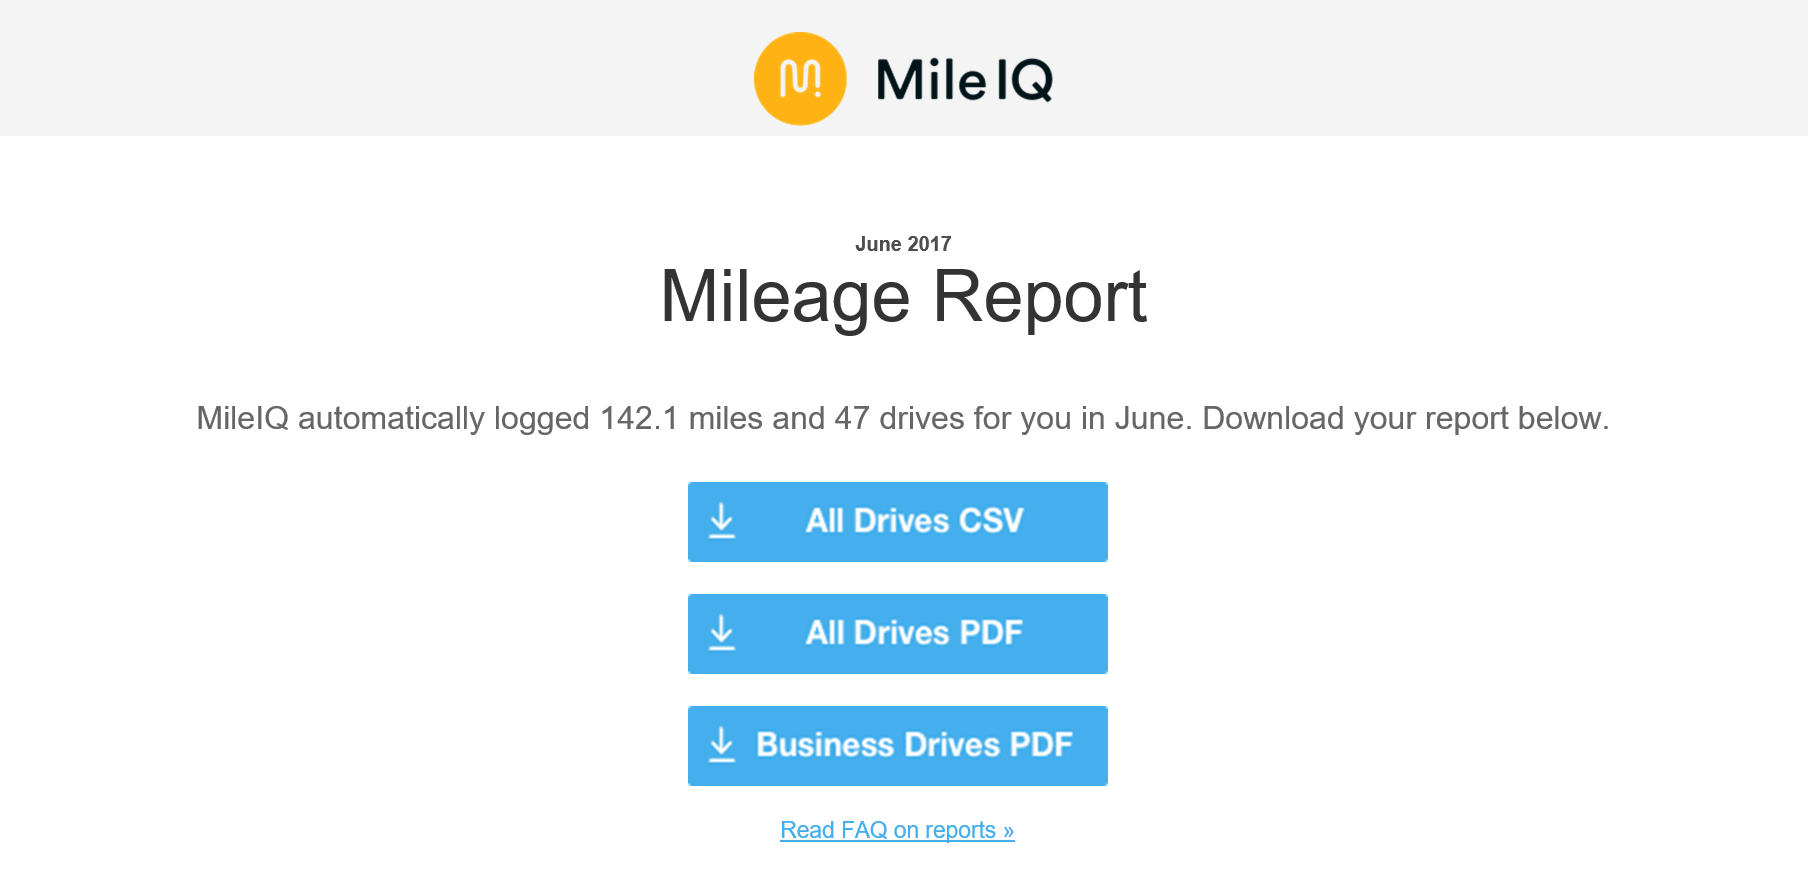 image of email with buttons to download CSV and PDF reports for June